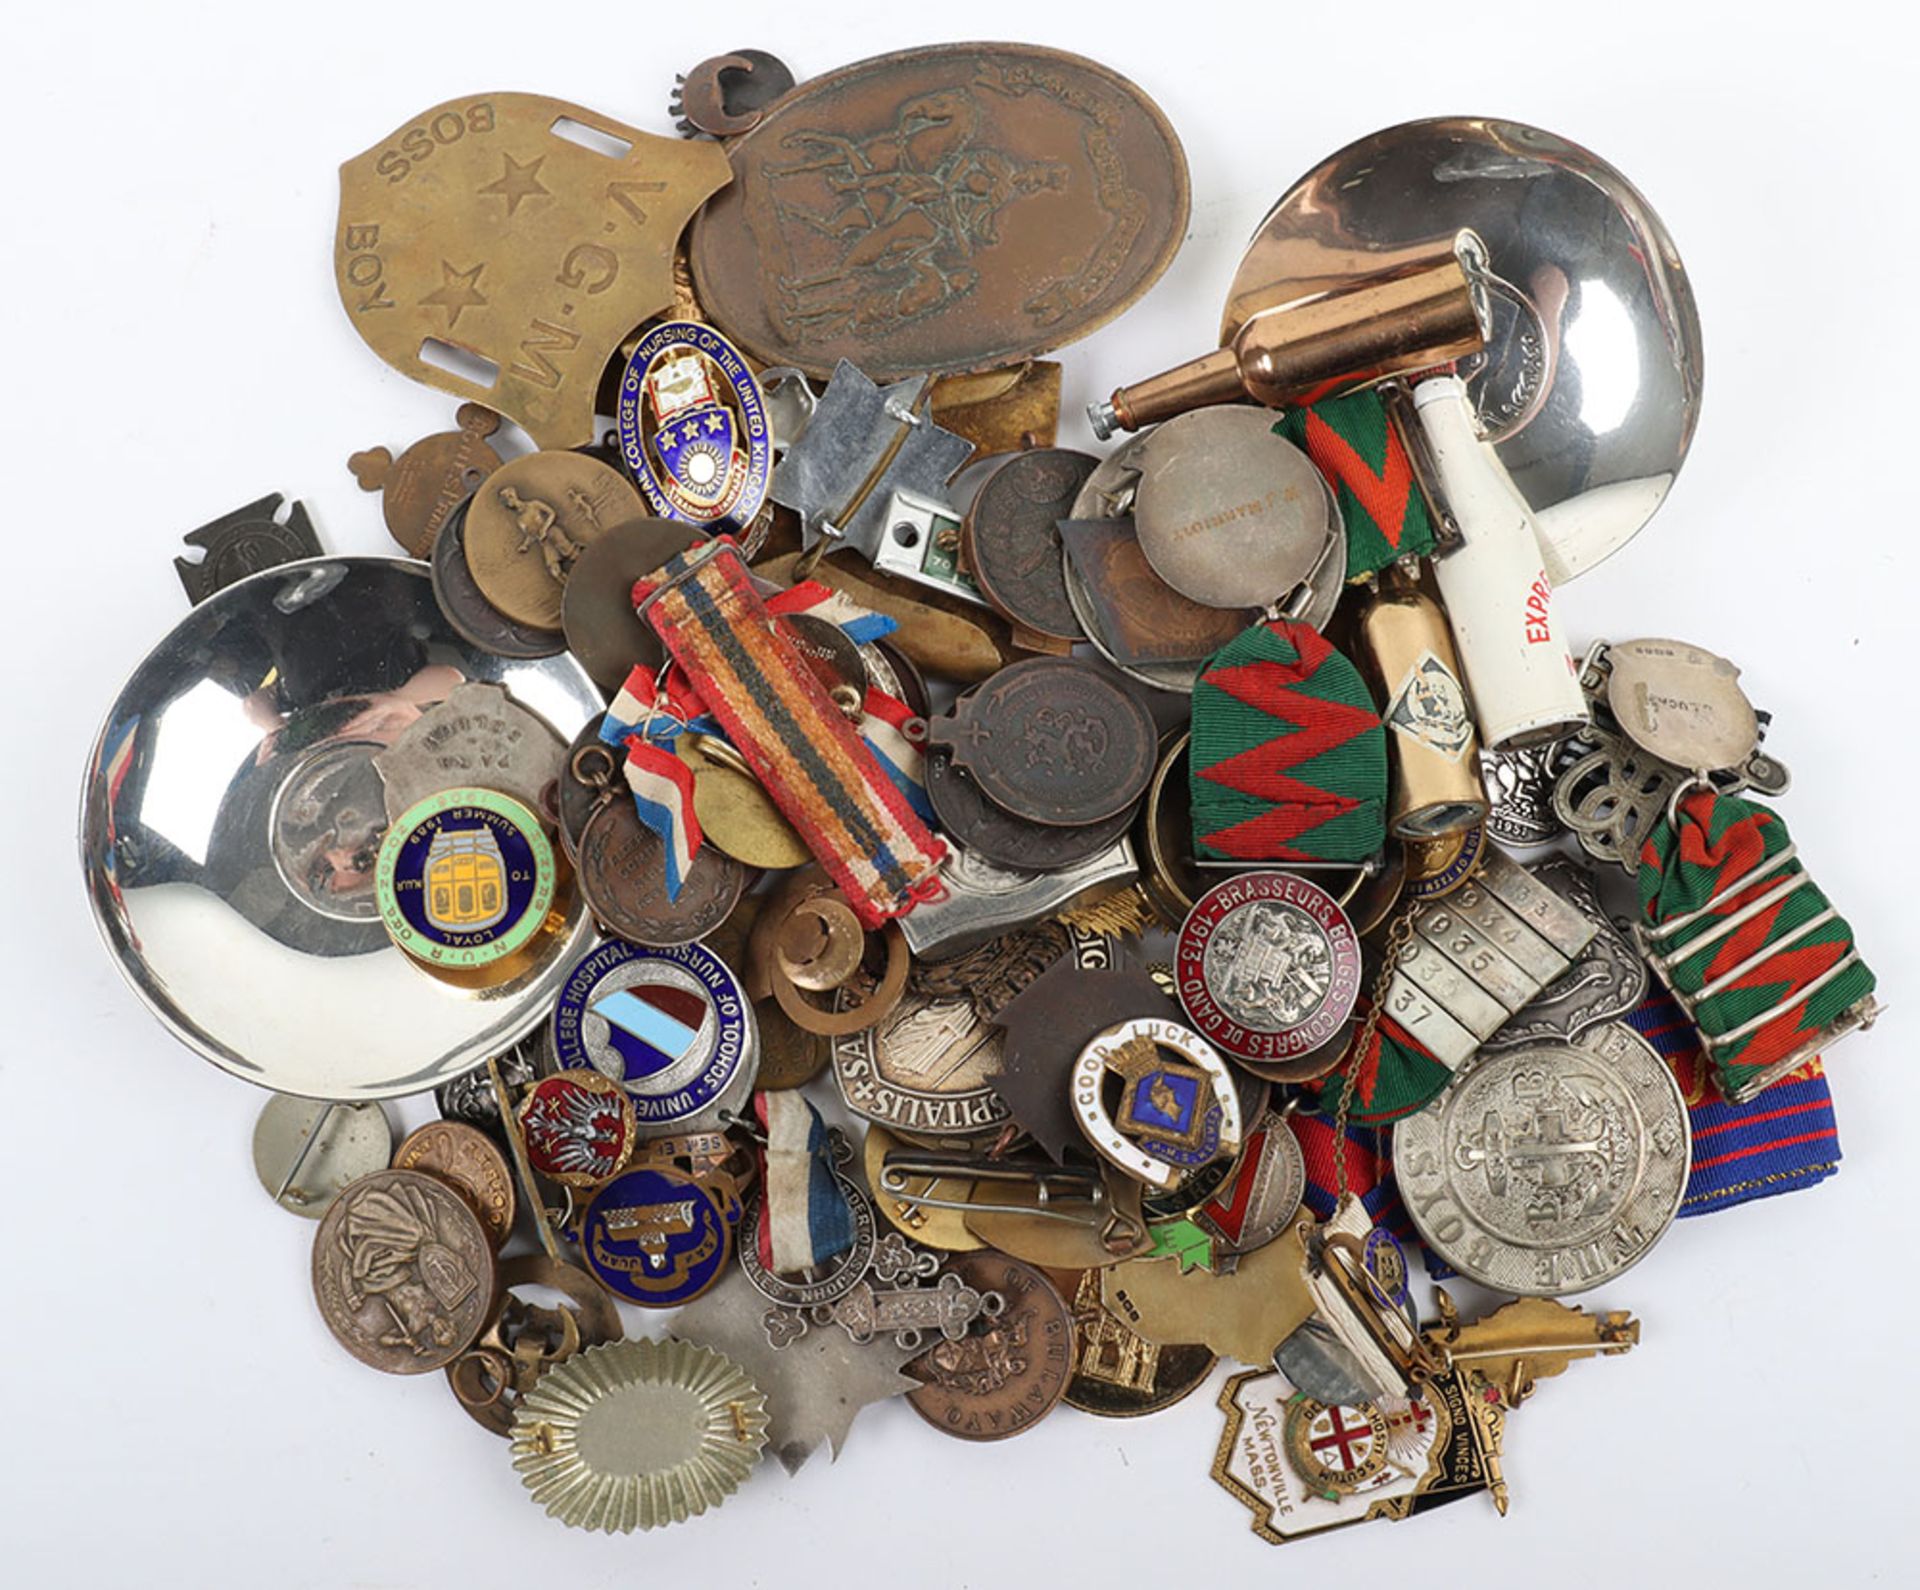 A selection of badges and medals for various awards and services